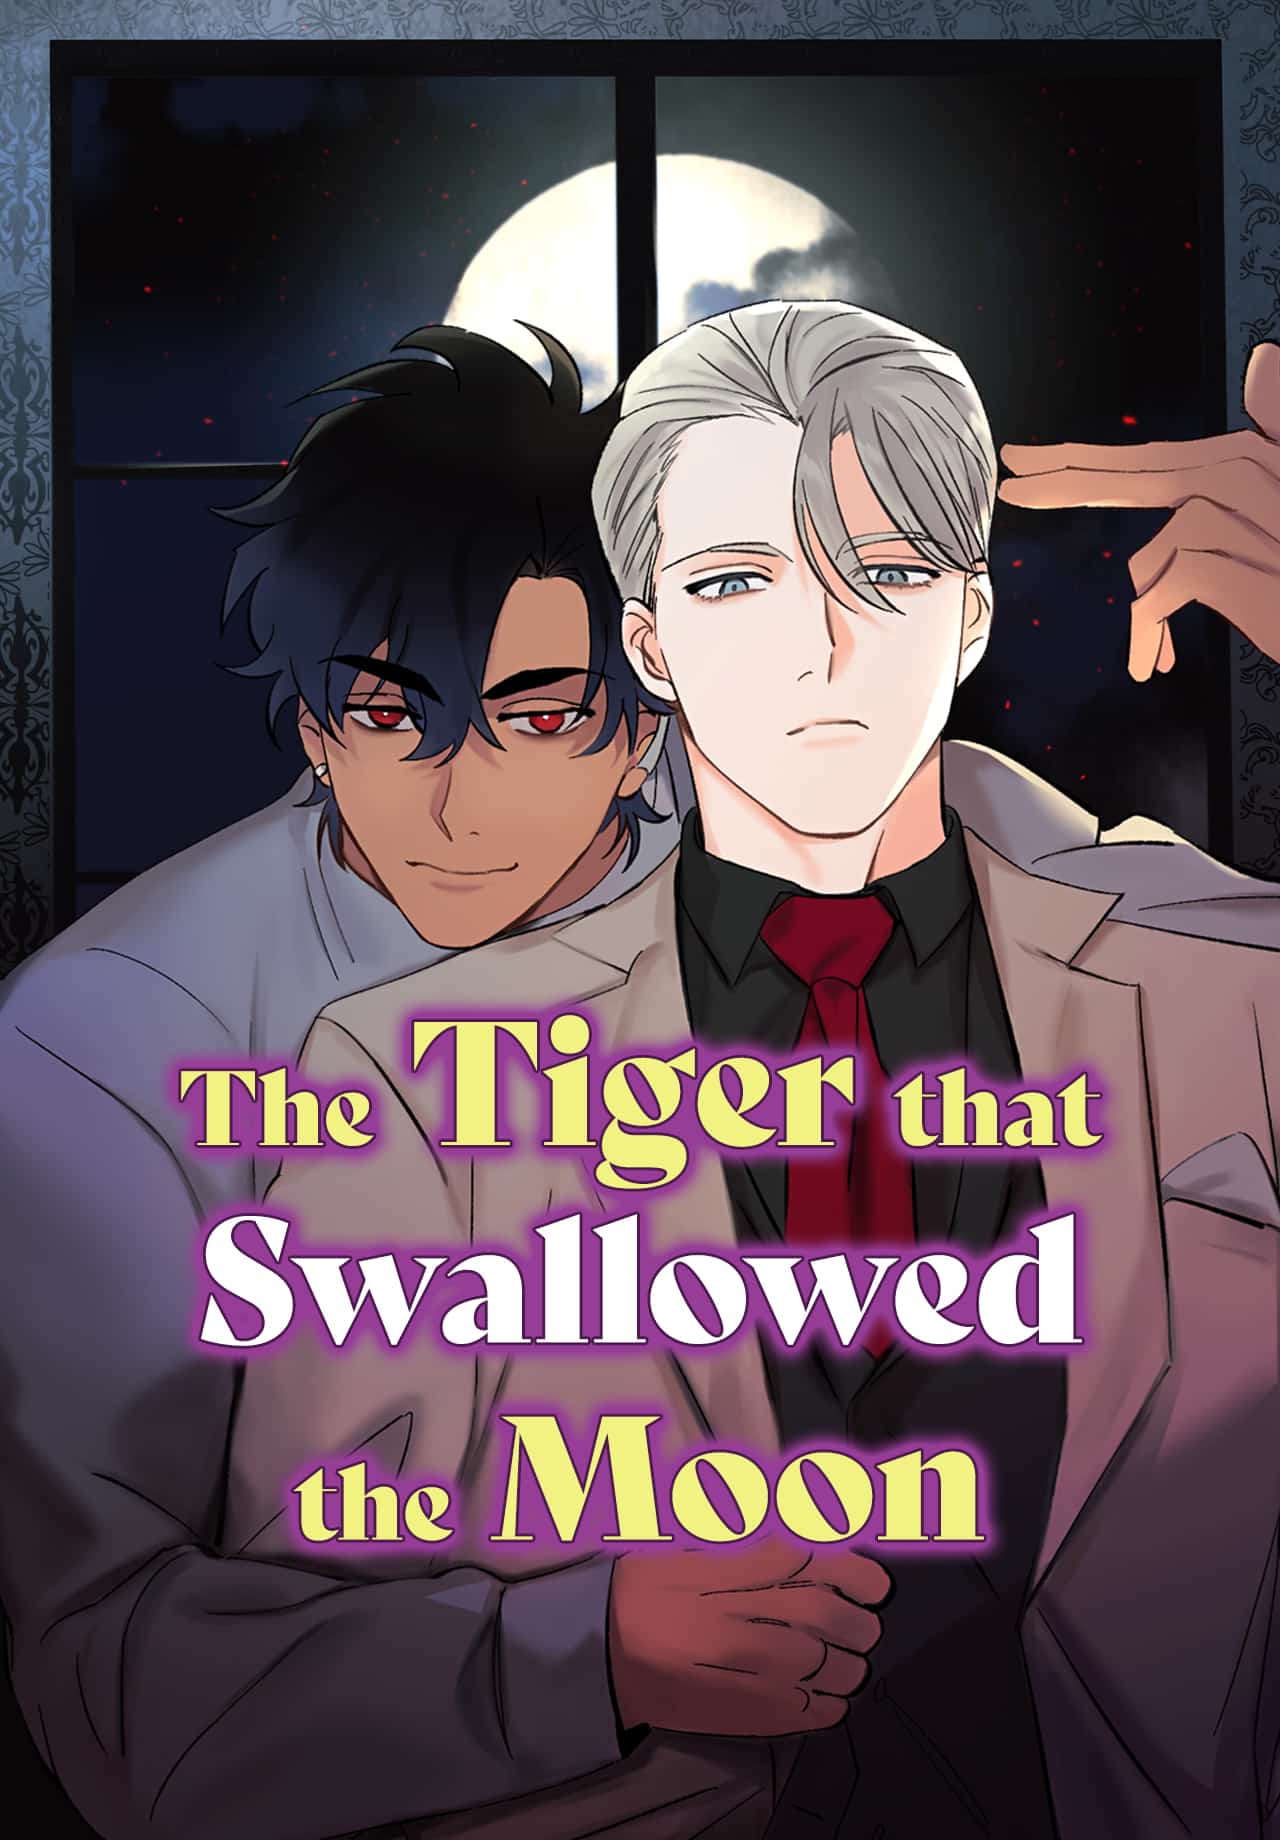 A Tiger That Swallowed the Moon